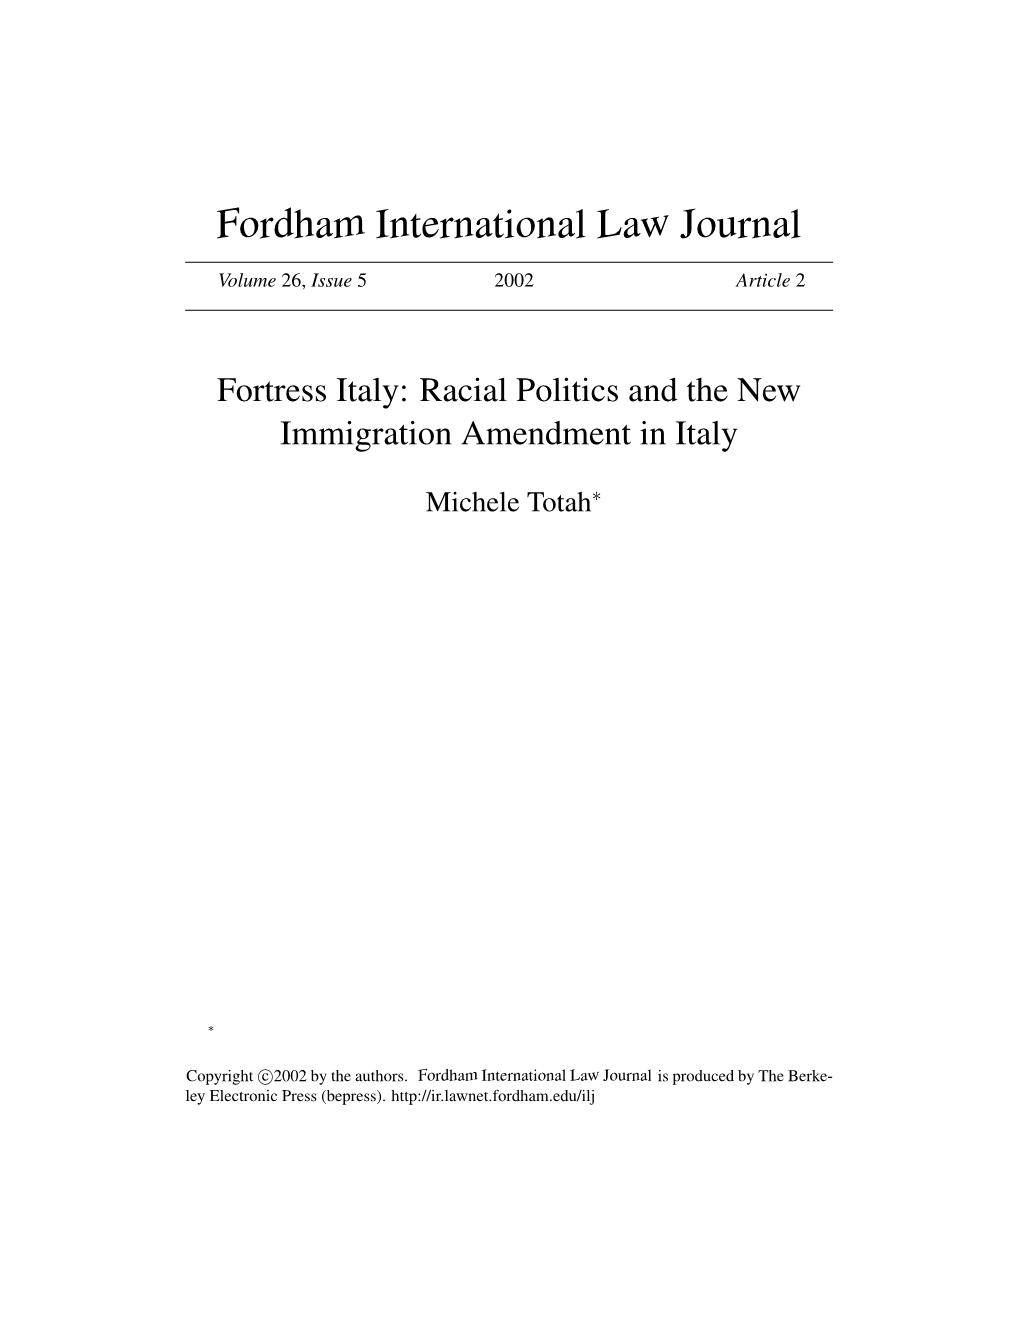 Fortress Italy: Racial Politics and the New Immigration Amendment in Italy